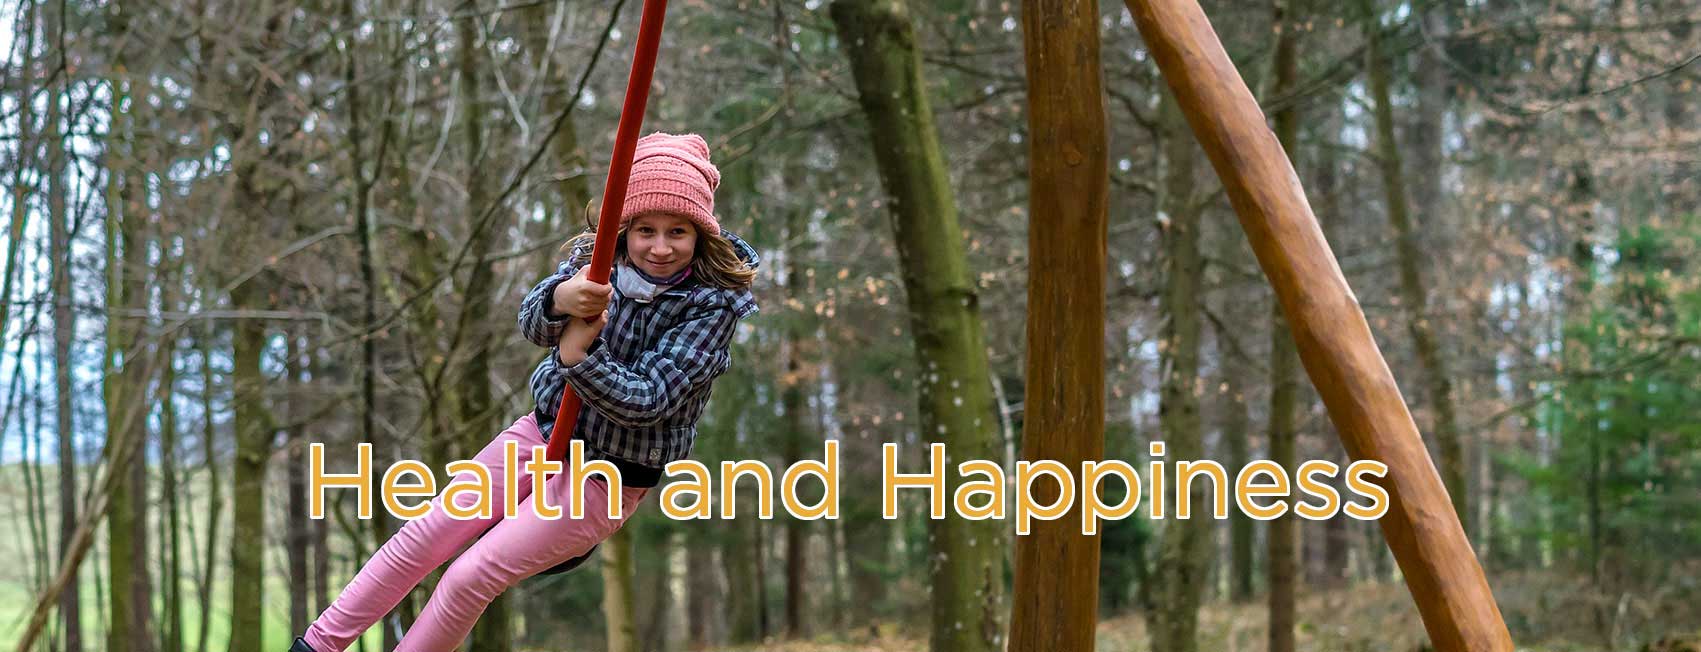 Health and Happiness page